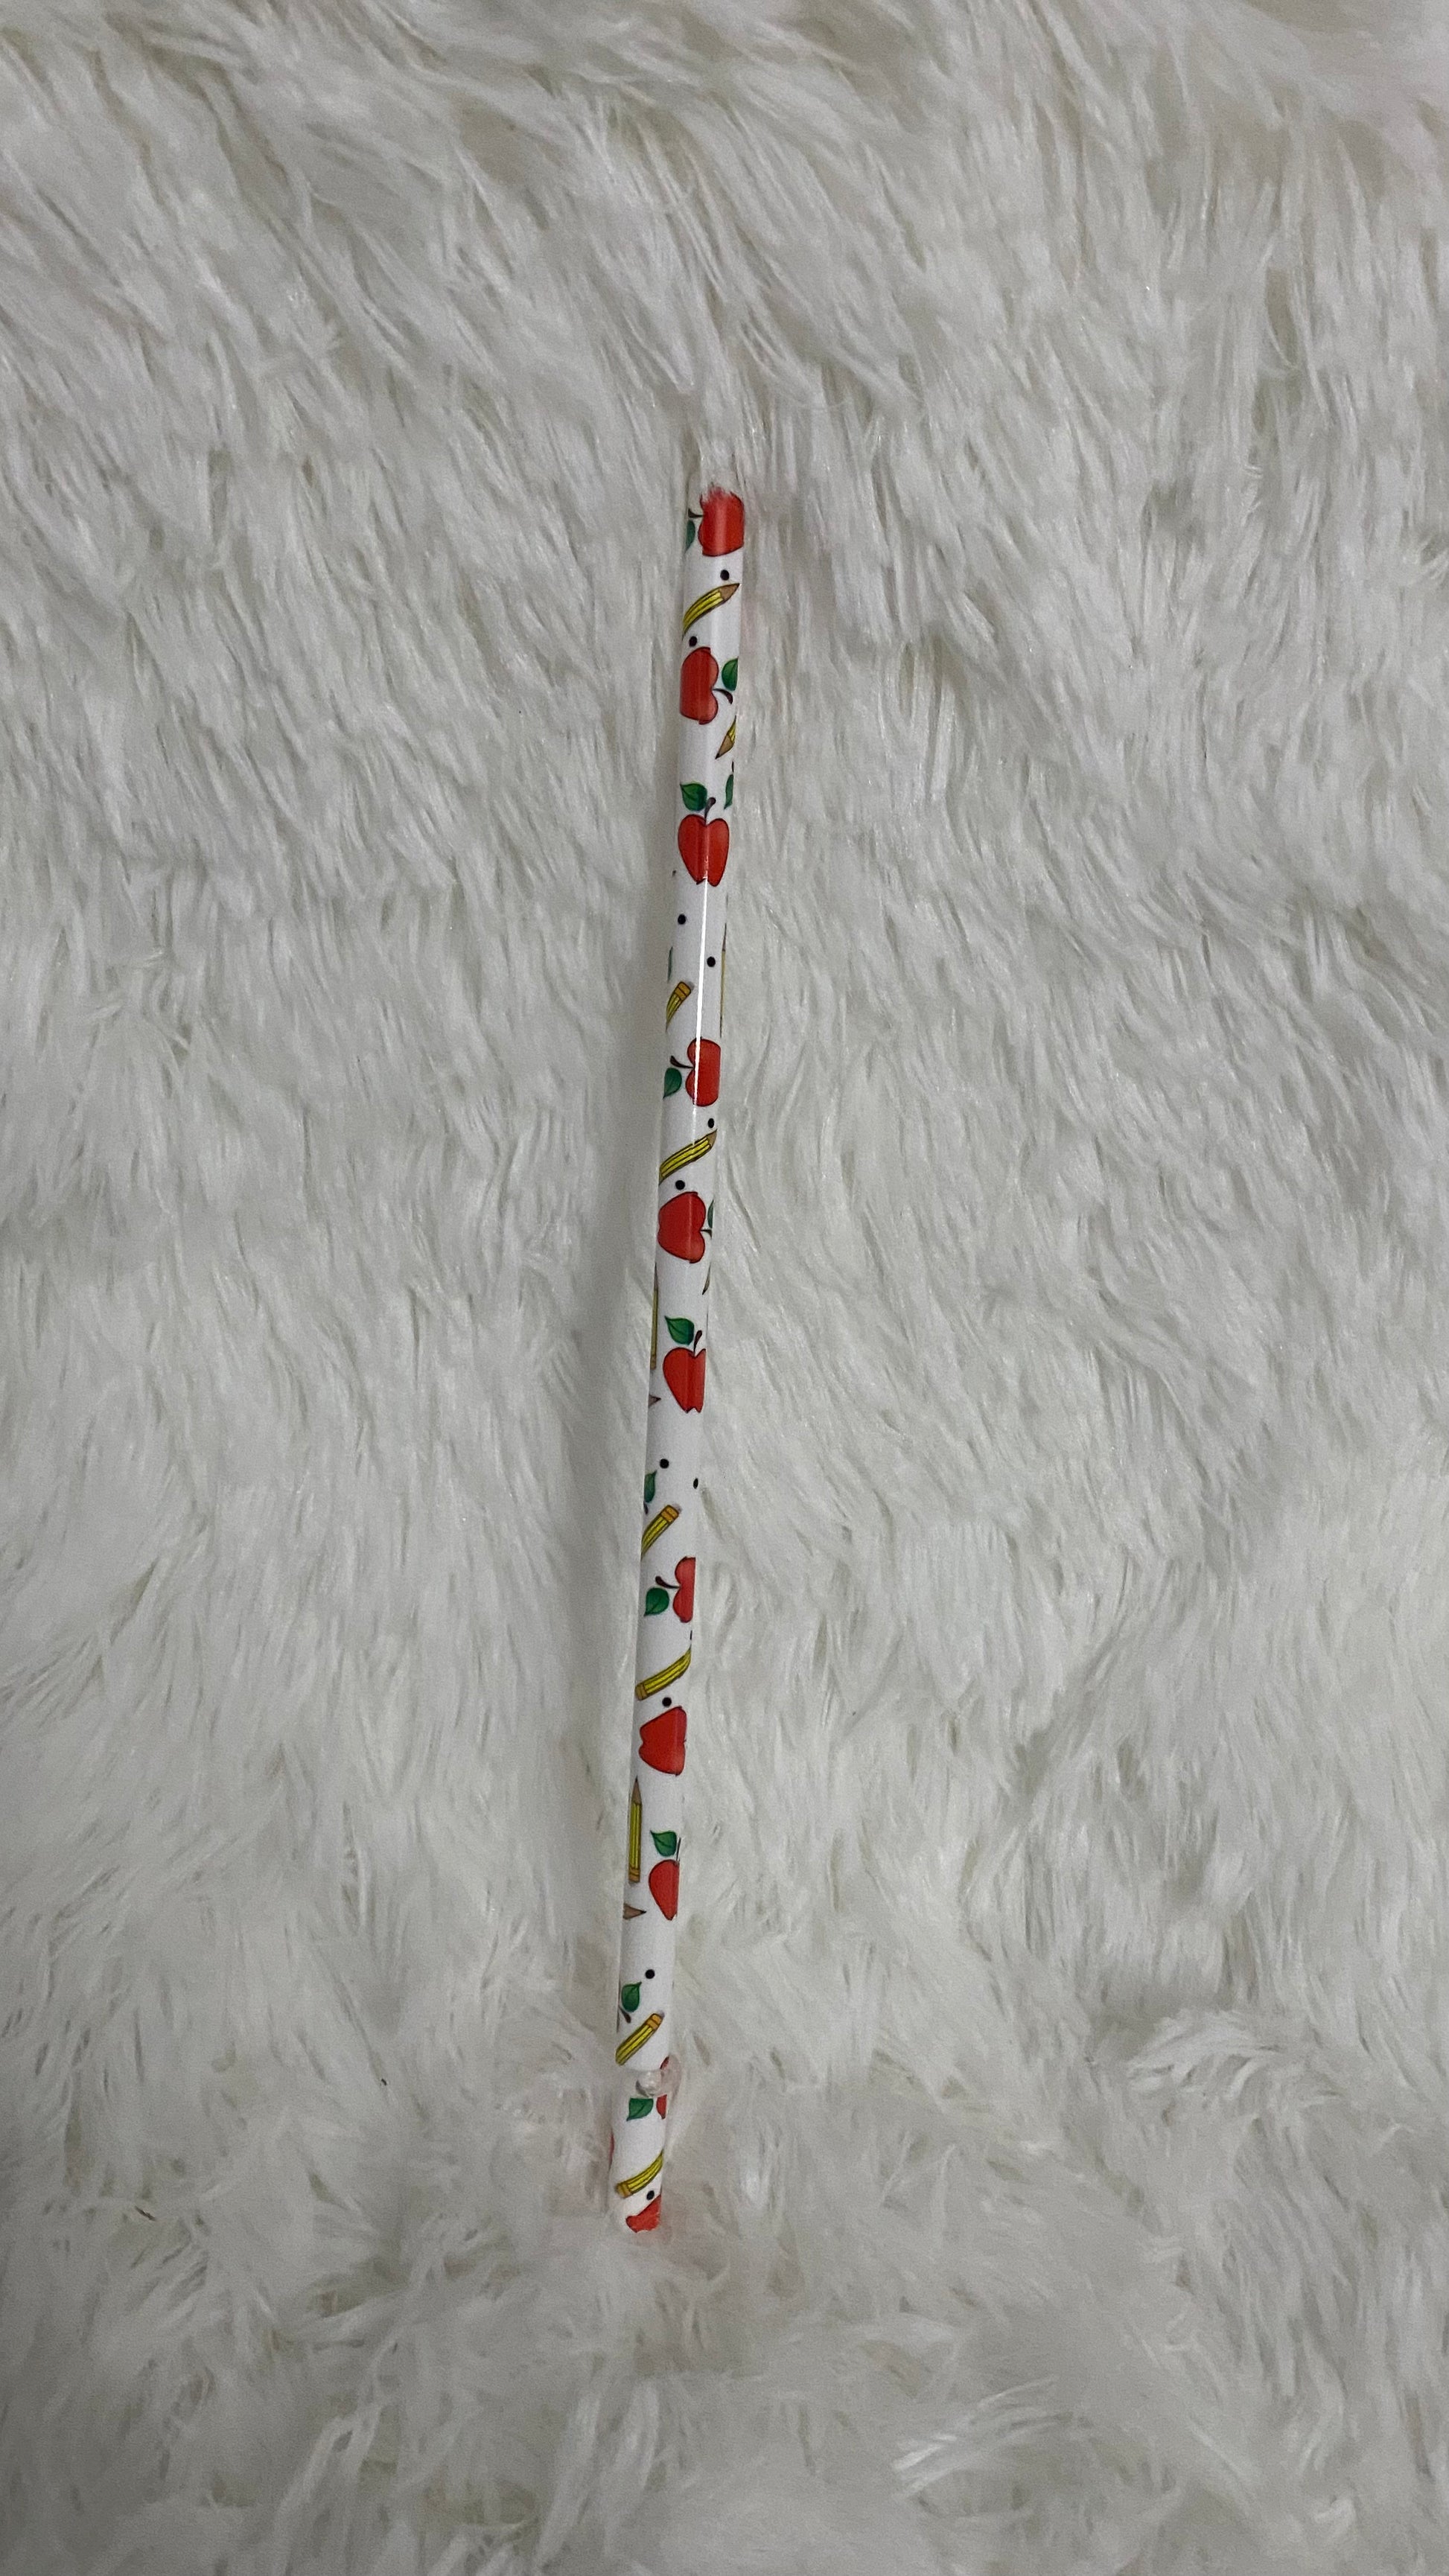 SEMI-HARD PLASTIC STRAW THAT HAS APPLES AND PENCILS TEACHER PRINT WRAPPED AROUND IT WITH STOPPER - Crazy Kat Design Co